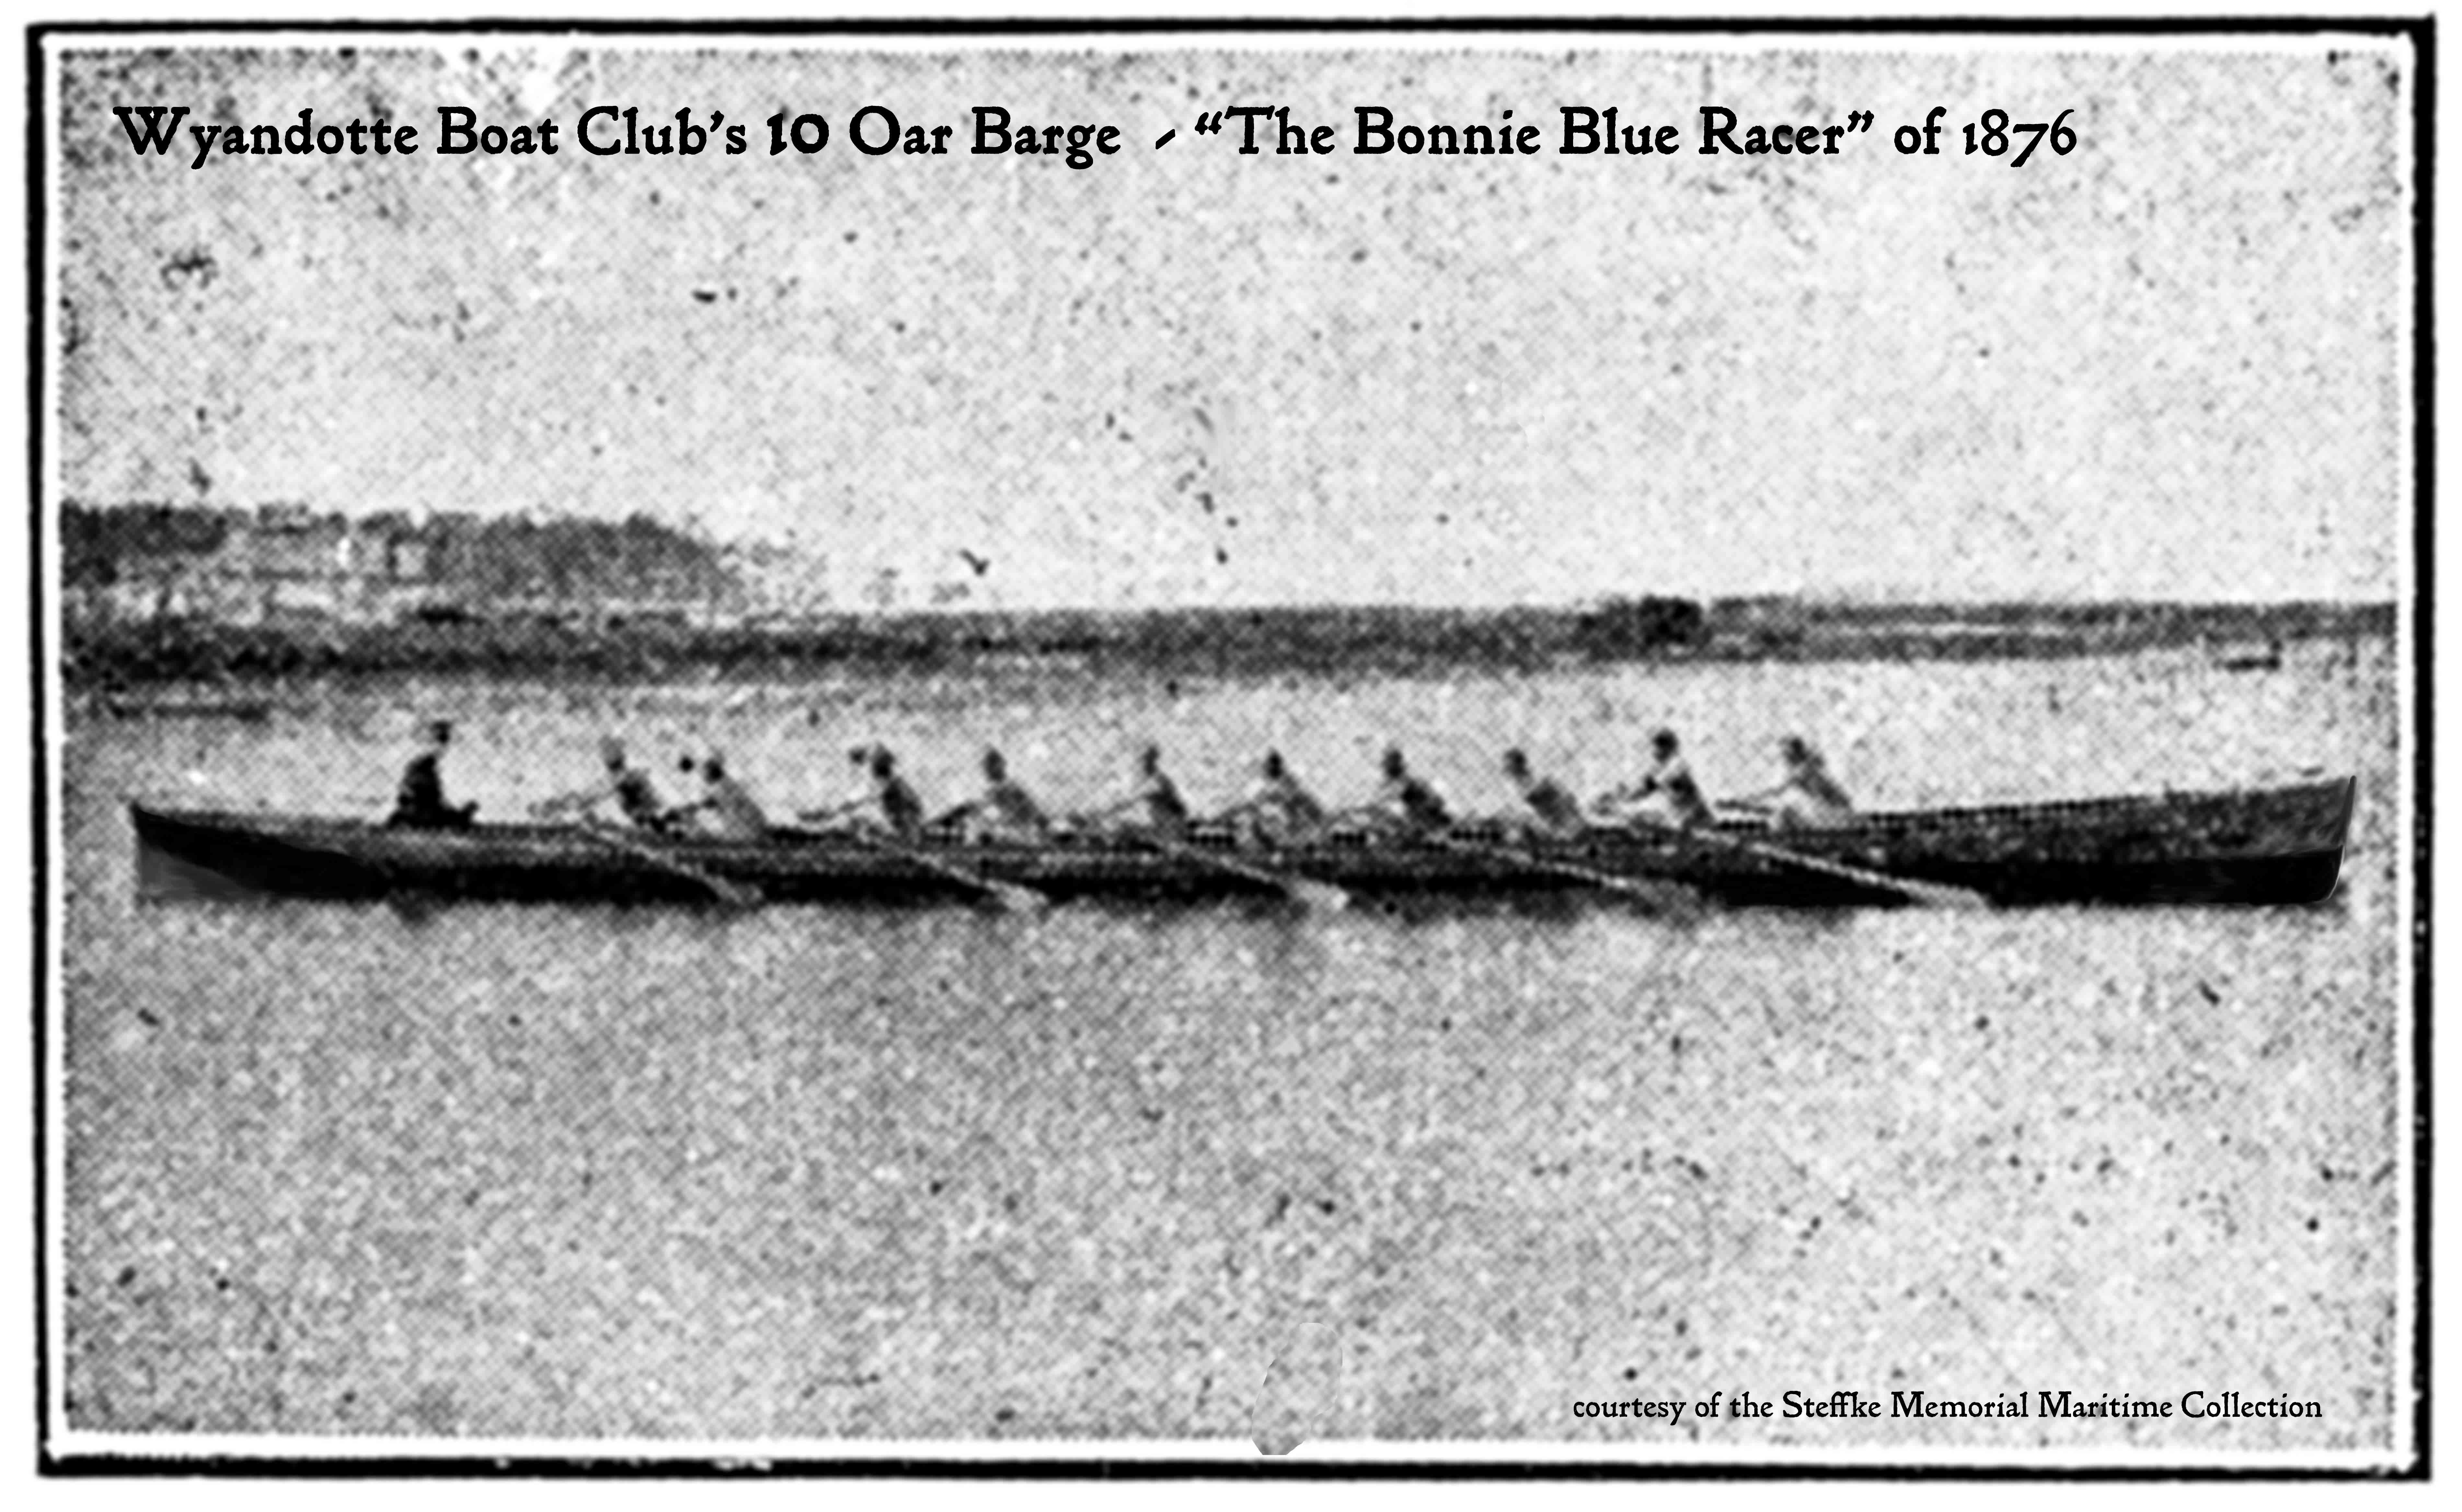 The 'Bonnie Blue Racer' a 10 man barge called the 